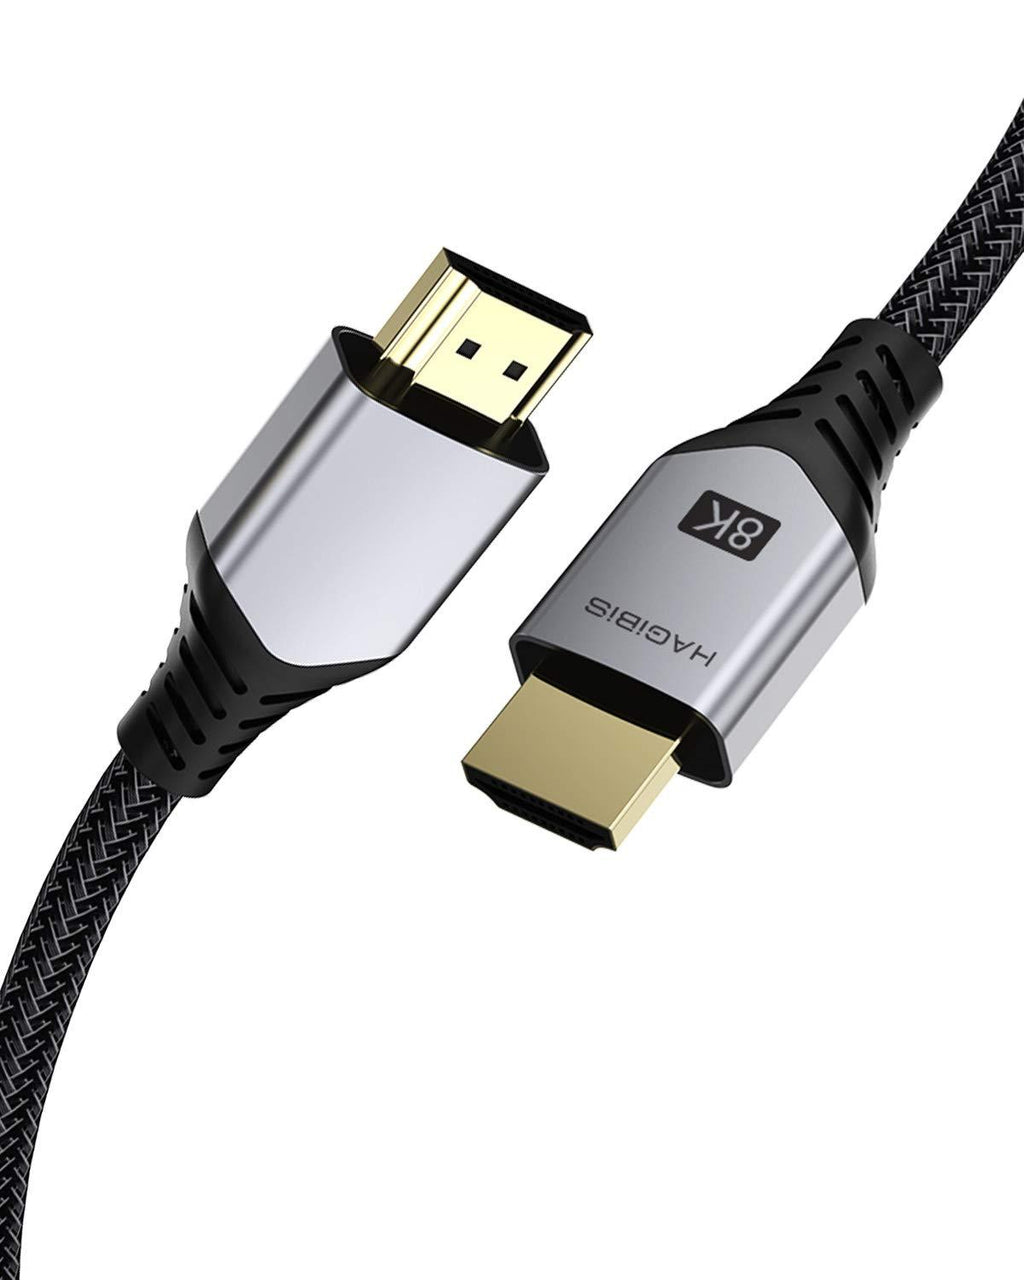 Hagibis HDMI 2.1 Cable 8K Ultra HD 144Hz 48Gbps High Speed HDMI Cable, 8K/60Hz 4K/120Hz Braided HDM Cord eARC HDR10 4:4:4 HDCP 2.2 & 2.3 for Dolby Vision Xbox PS4/5 NS Switch Apple TV 4K (1m/3ft) 1m/3ft